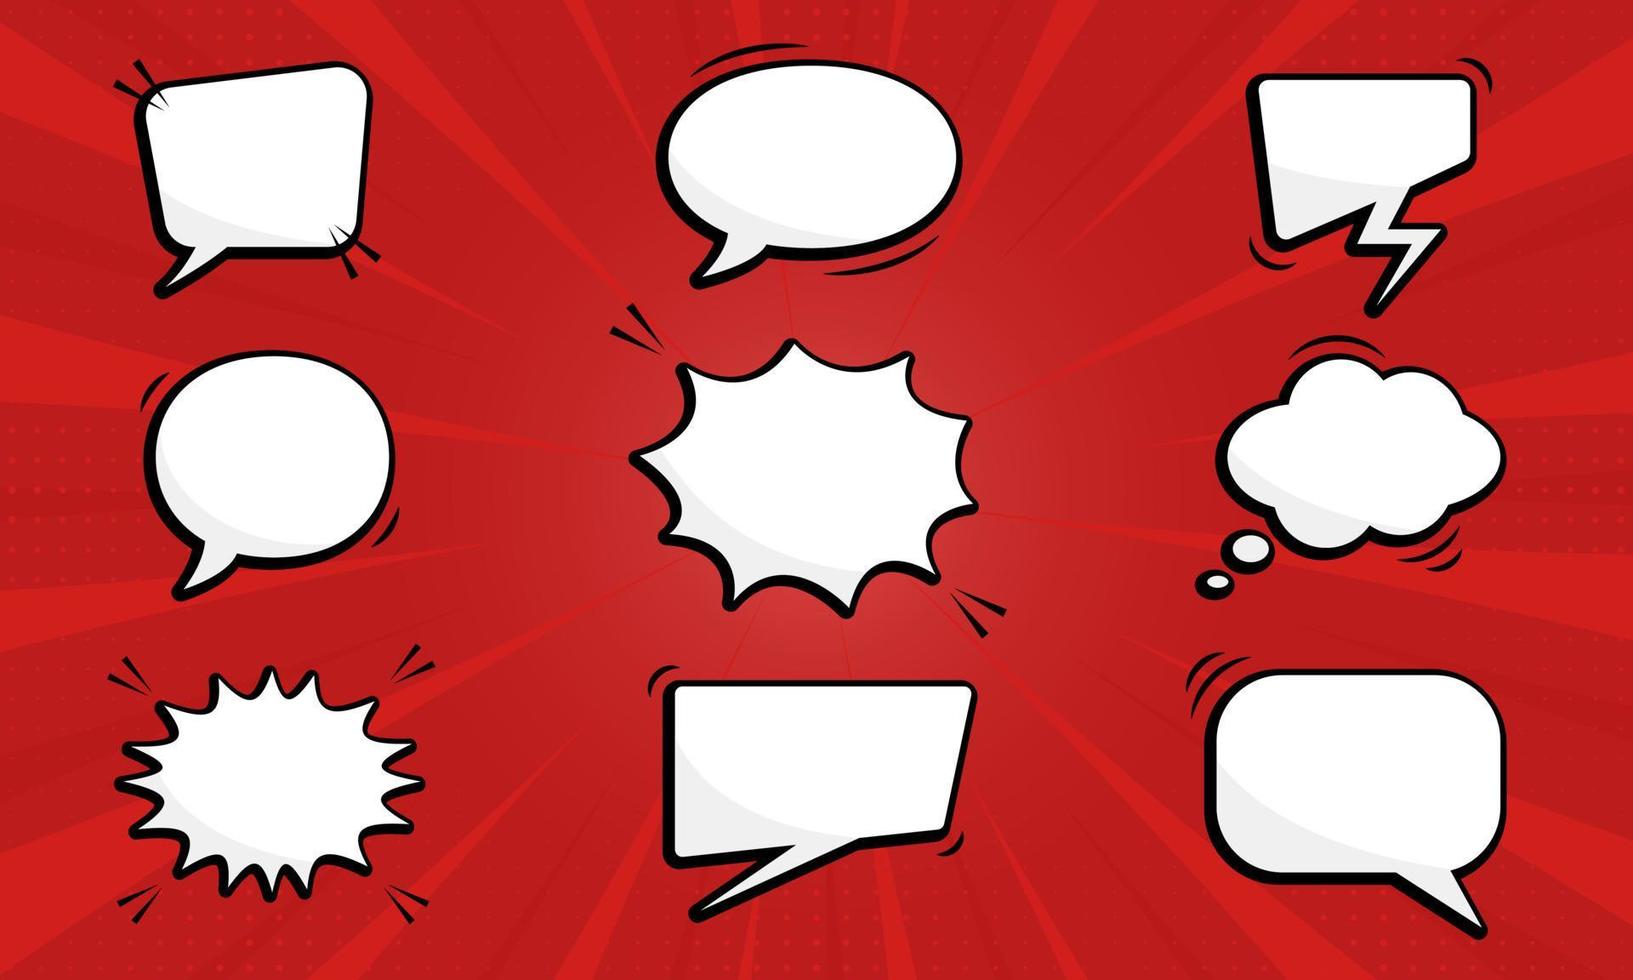 Cartoon Funny Speech Bubbles on Red Pop Art Background. Set of Comic Speech Balloons with Halftone. Collection Empty Retro Bubbles for Chat, Dialog, Text Message. Isolated Vector Illustration.